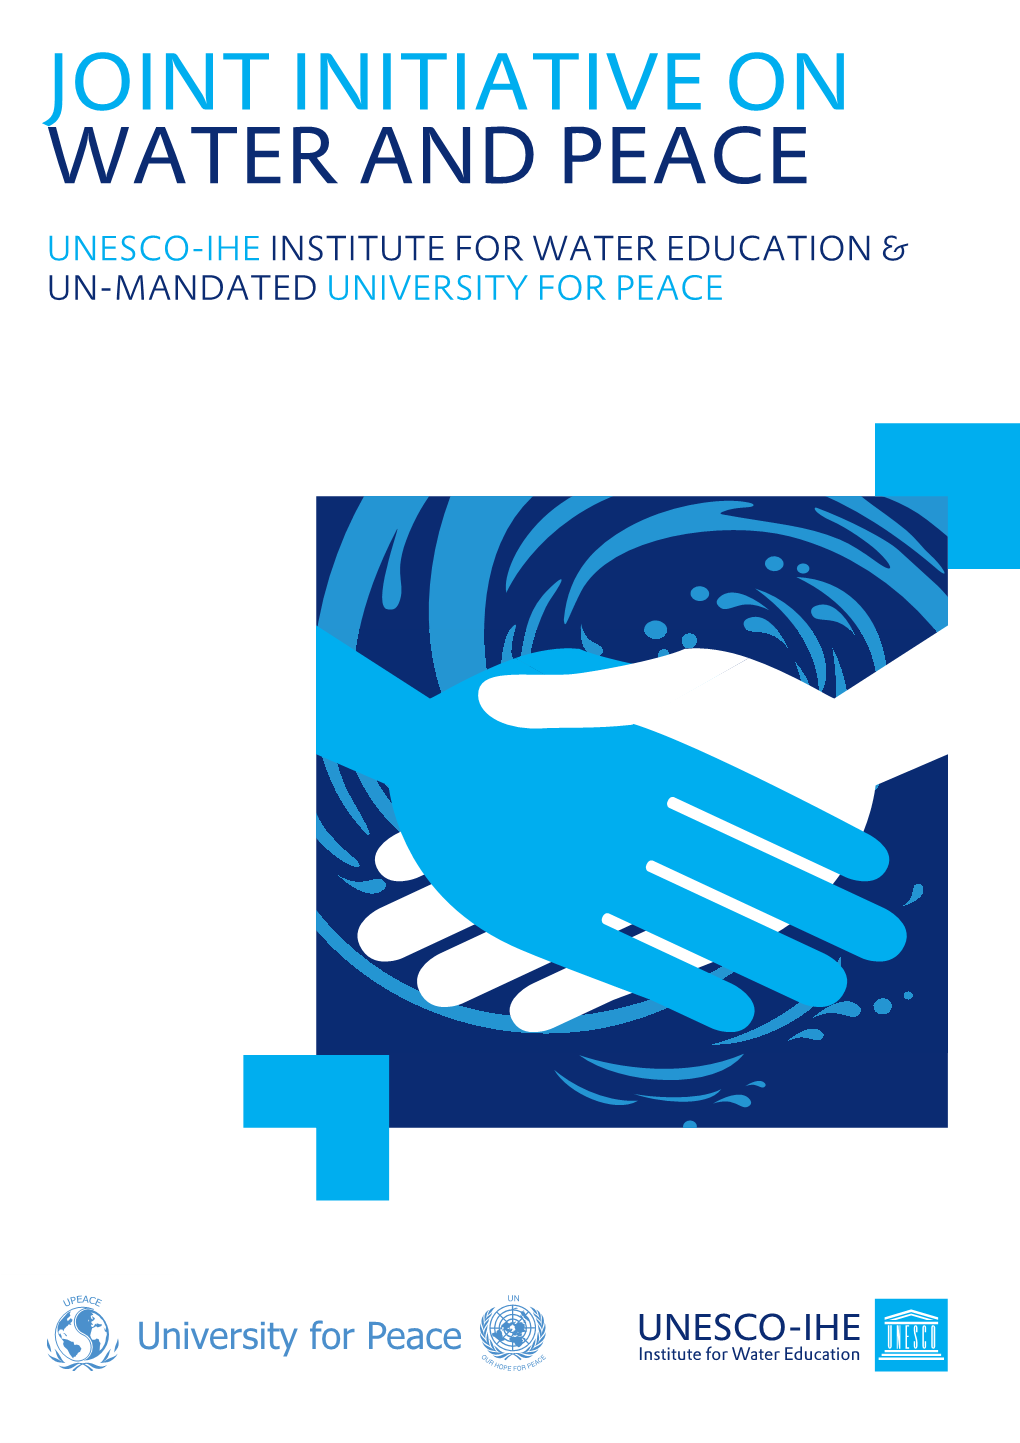 Joint Initiative on Water and Peace • UNESCO-IHE and UPEACE